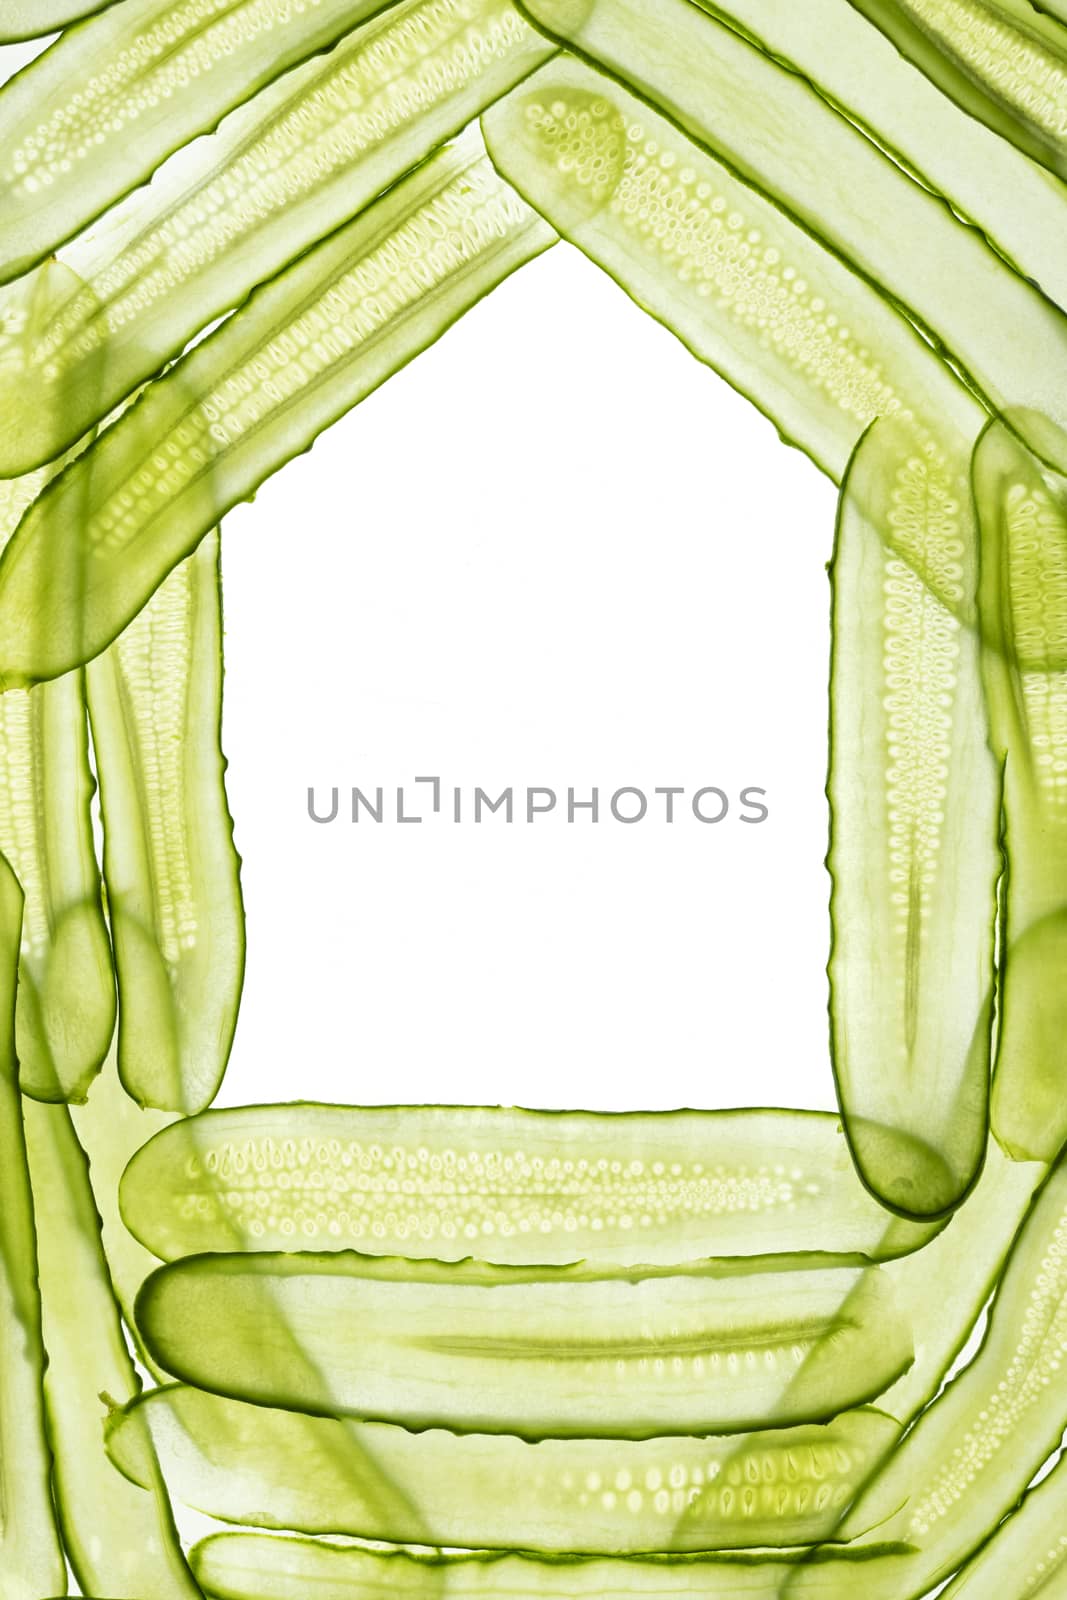 fresh sliced cucumber isolated on white background. Top view.